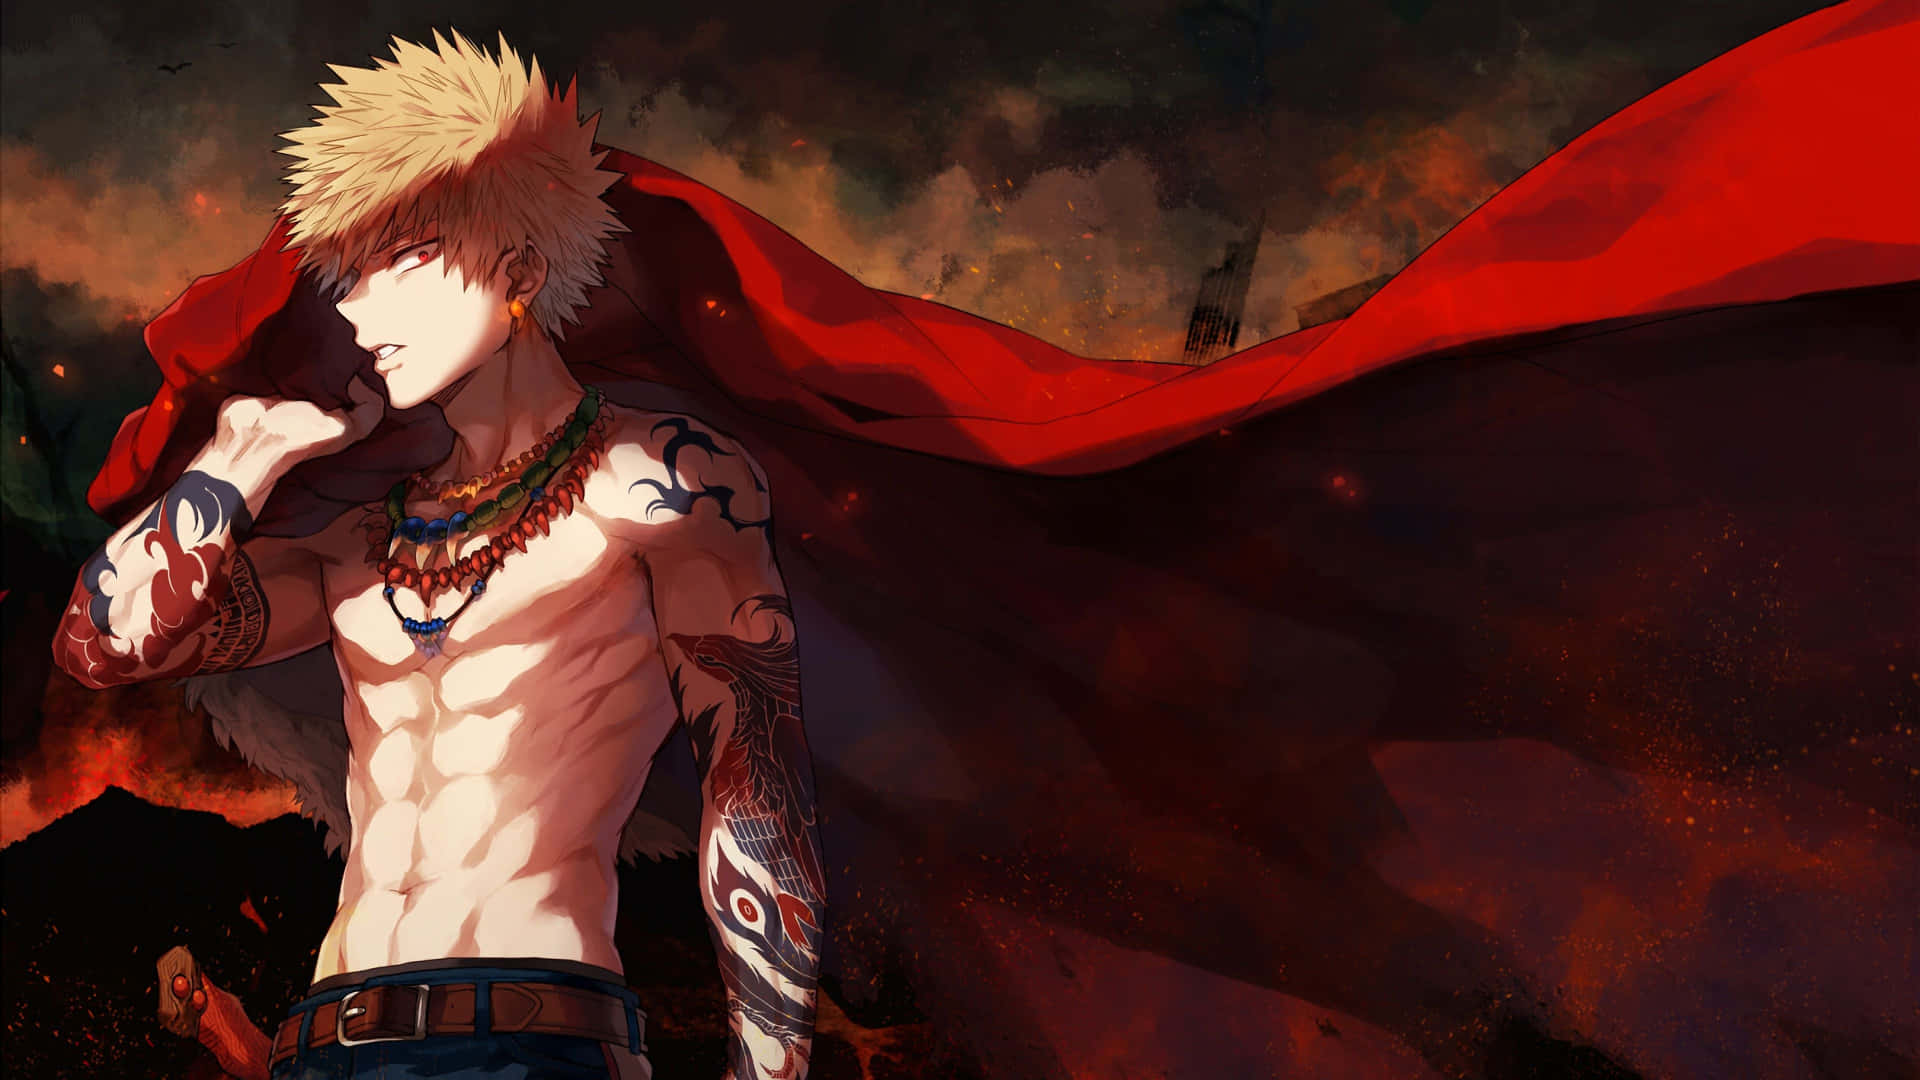 Intense Bakugo ready for action in high-resolution wallpaper.